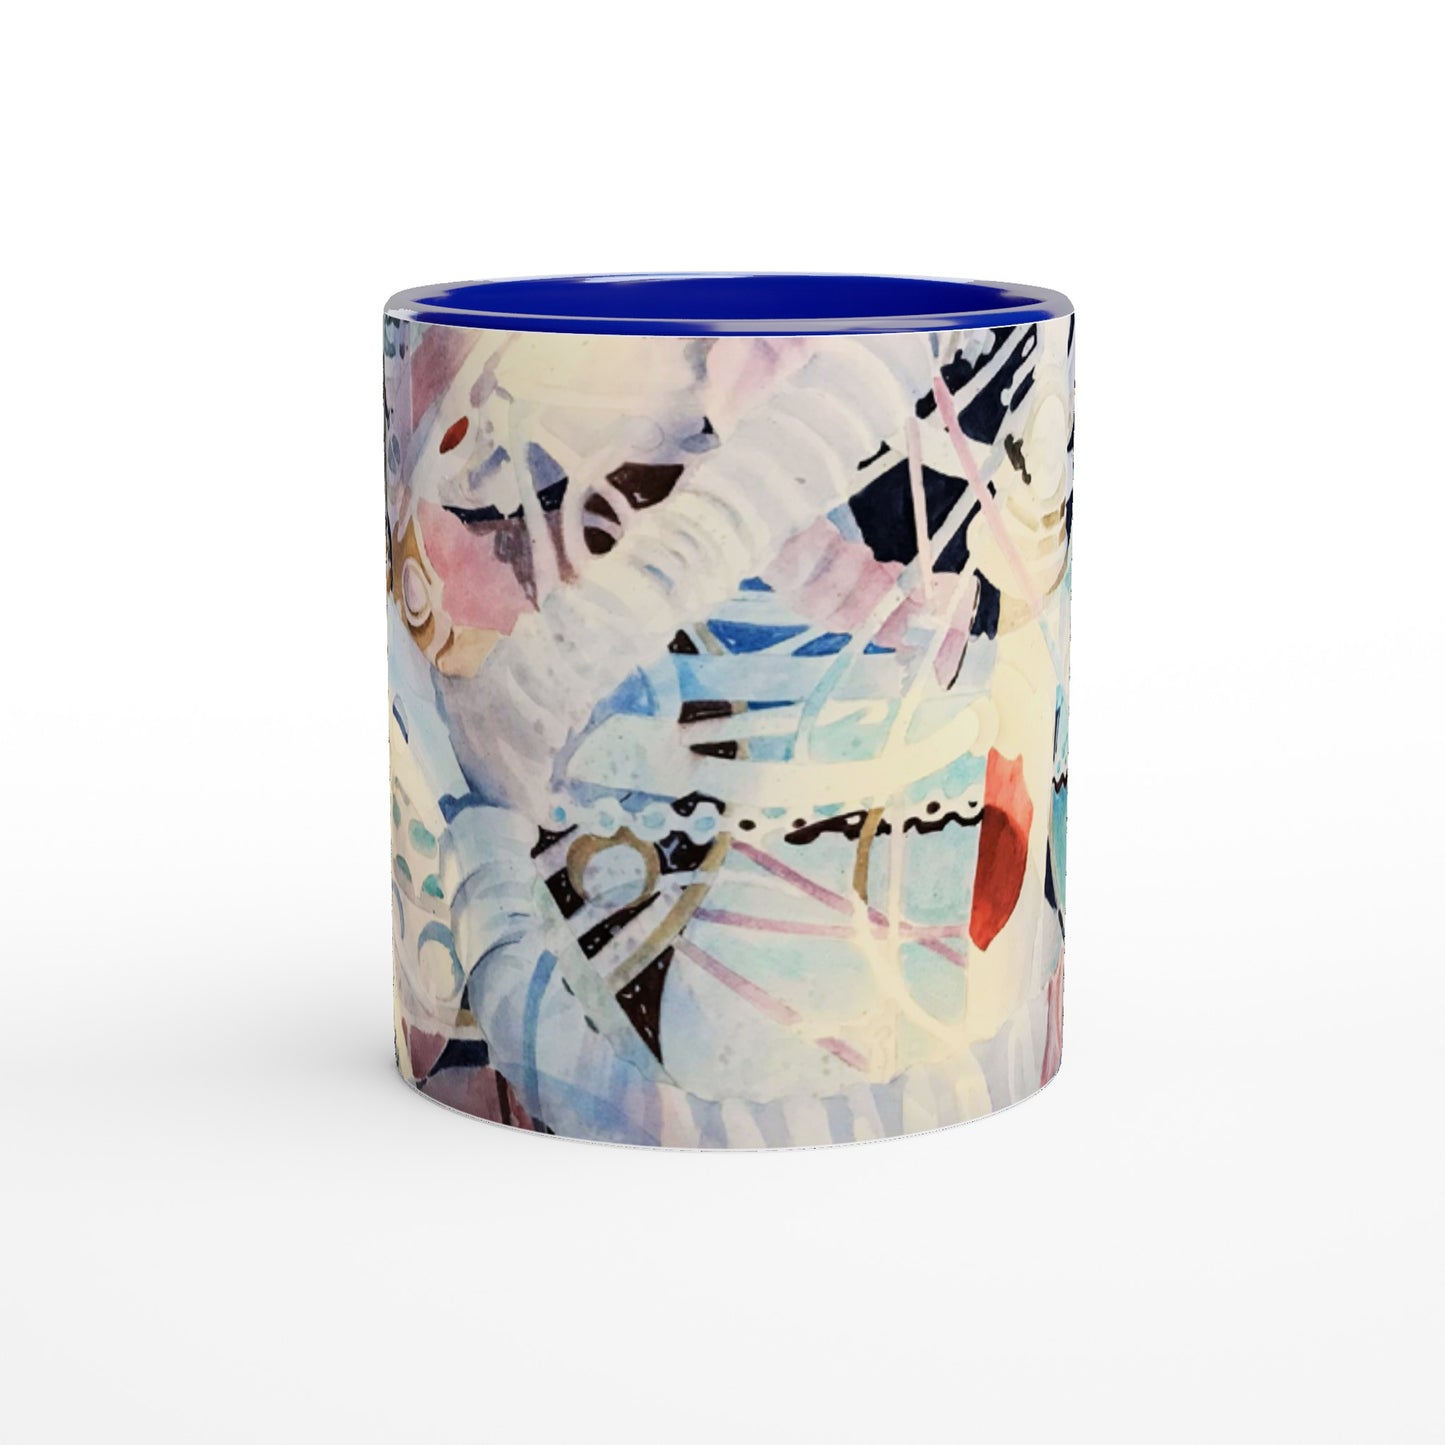 Wheel in a Wheel Watercolor" White 11oz Ceramic Mug with Color Inside by Barbara Cleary Designs